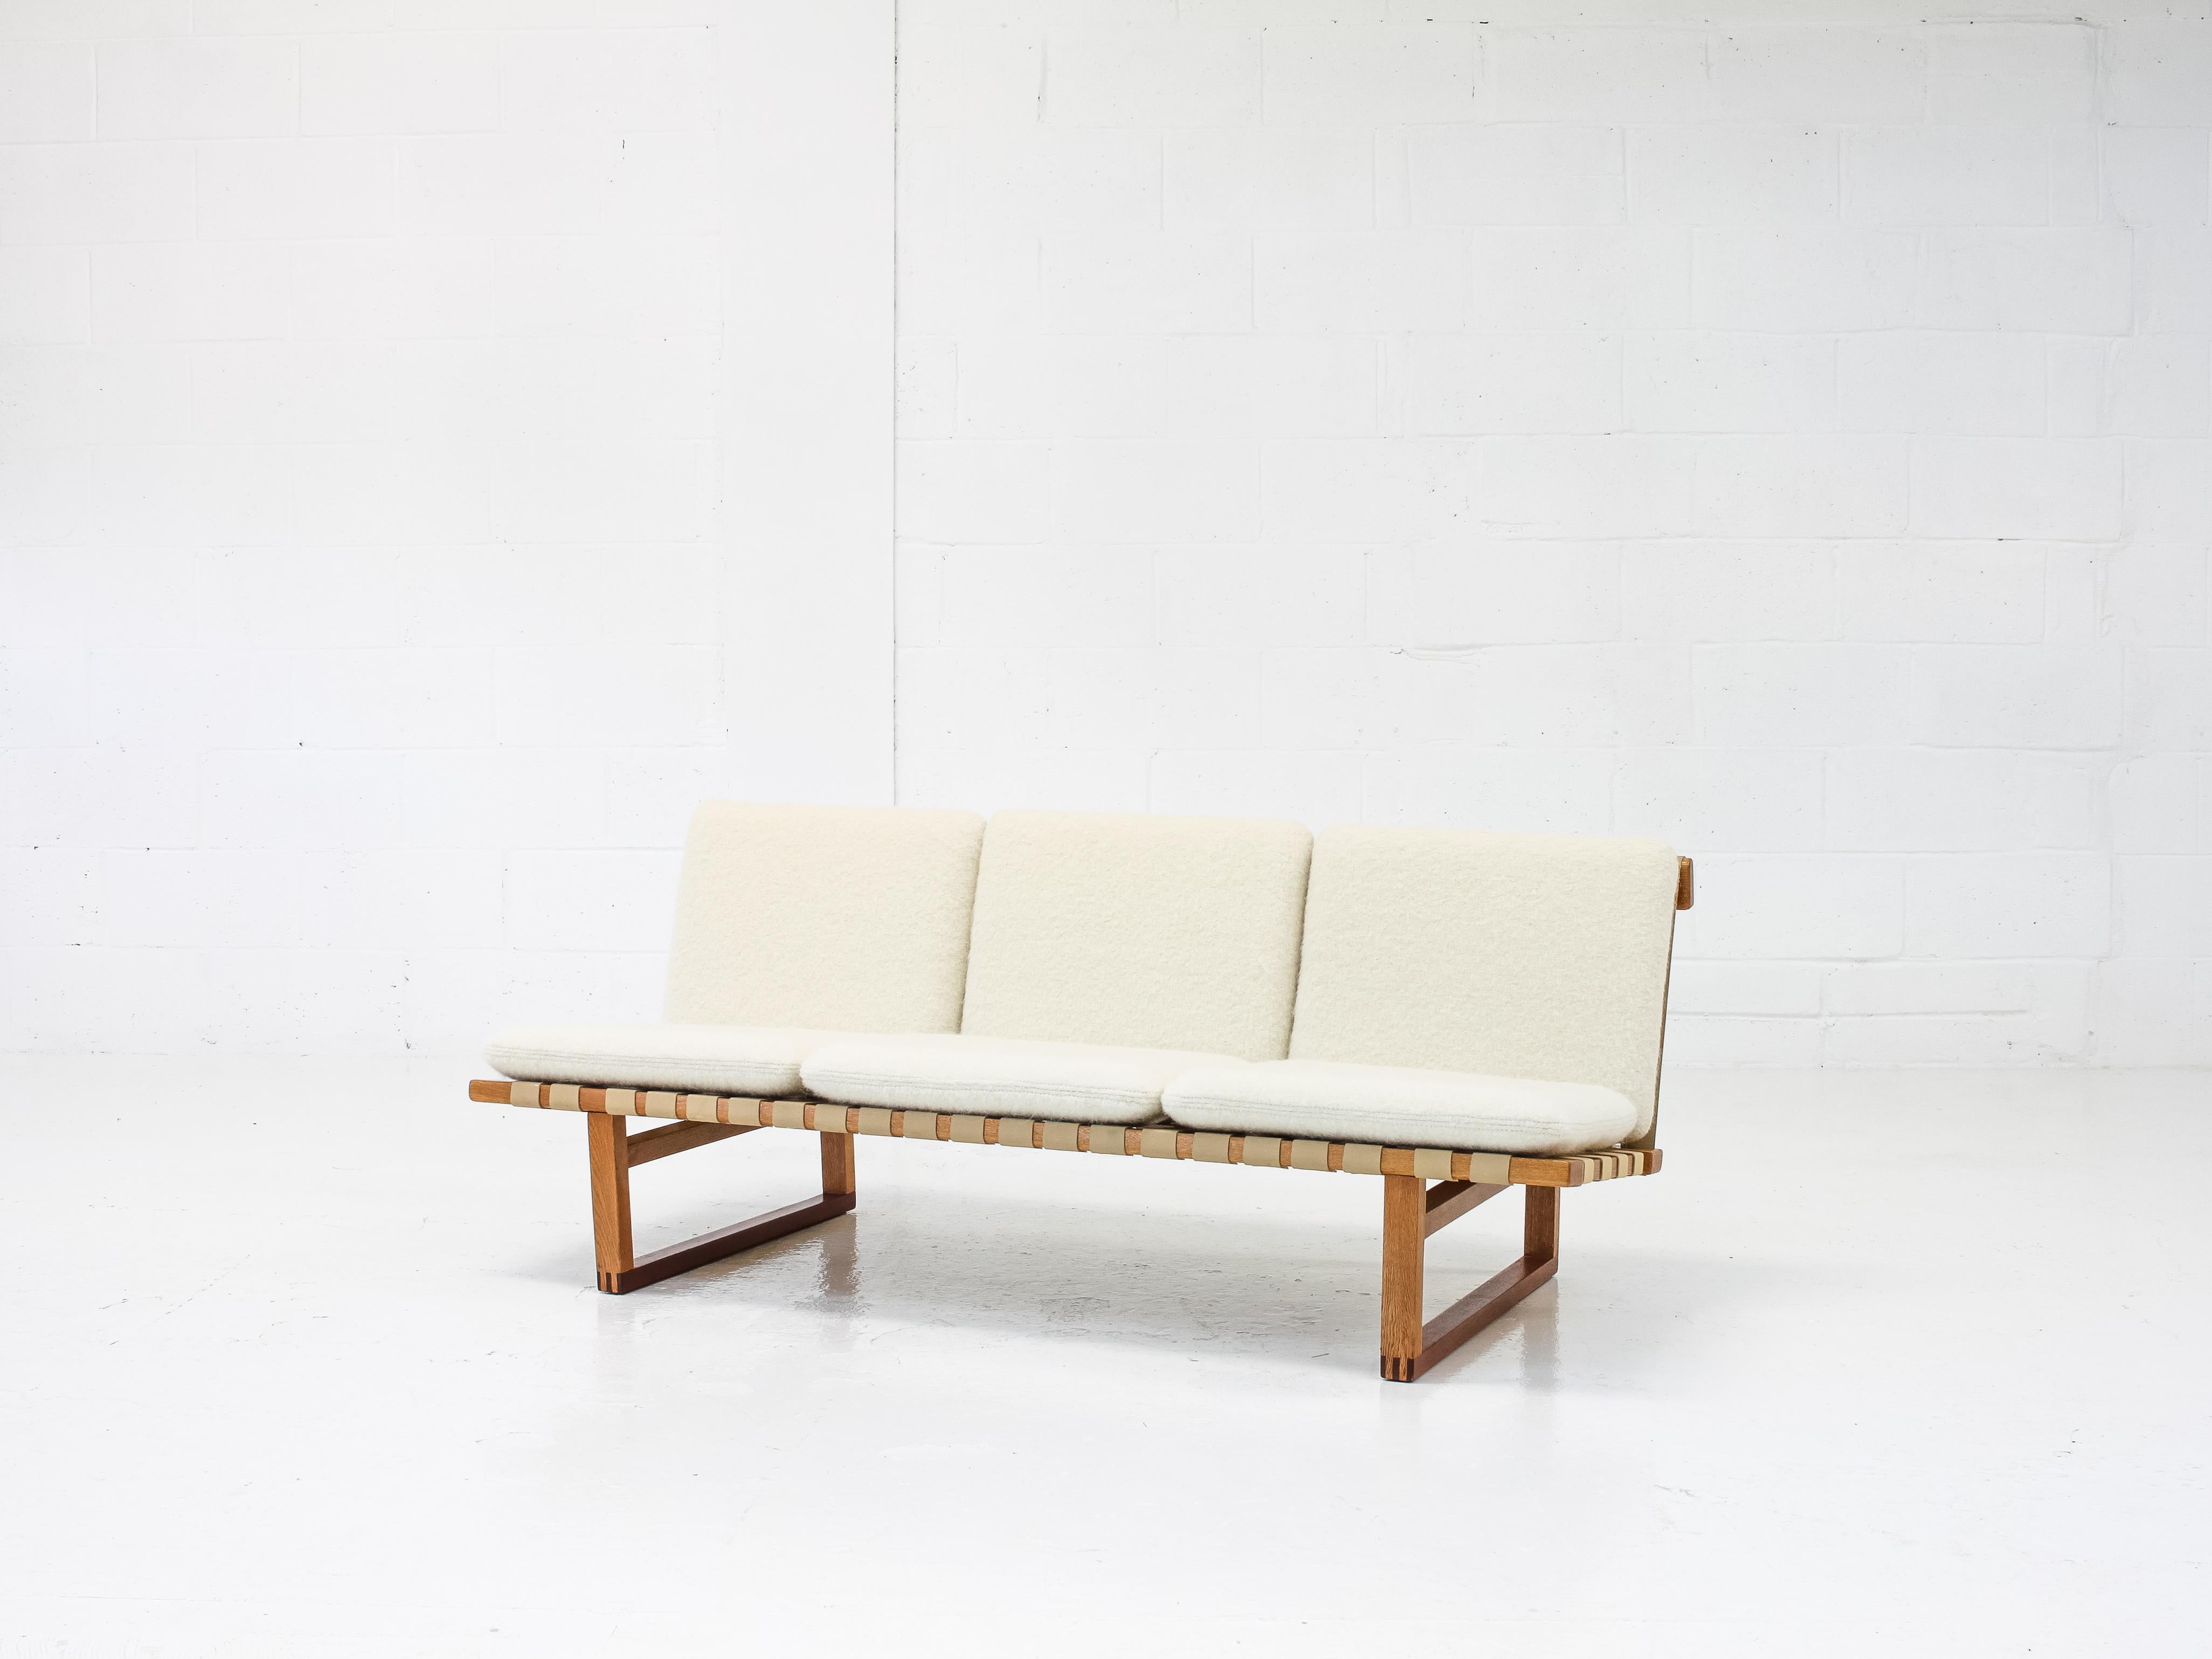 A Børge Mogensen three-seater sofa in oak and teak, designed in 1956, model number 211 for Fredericia Stolefabrik. Pieces in oak and teak with exposed webbing are rare and early production.

Consisting of a cubical frame made of solid oak and teak